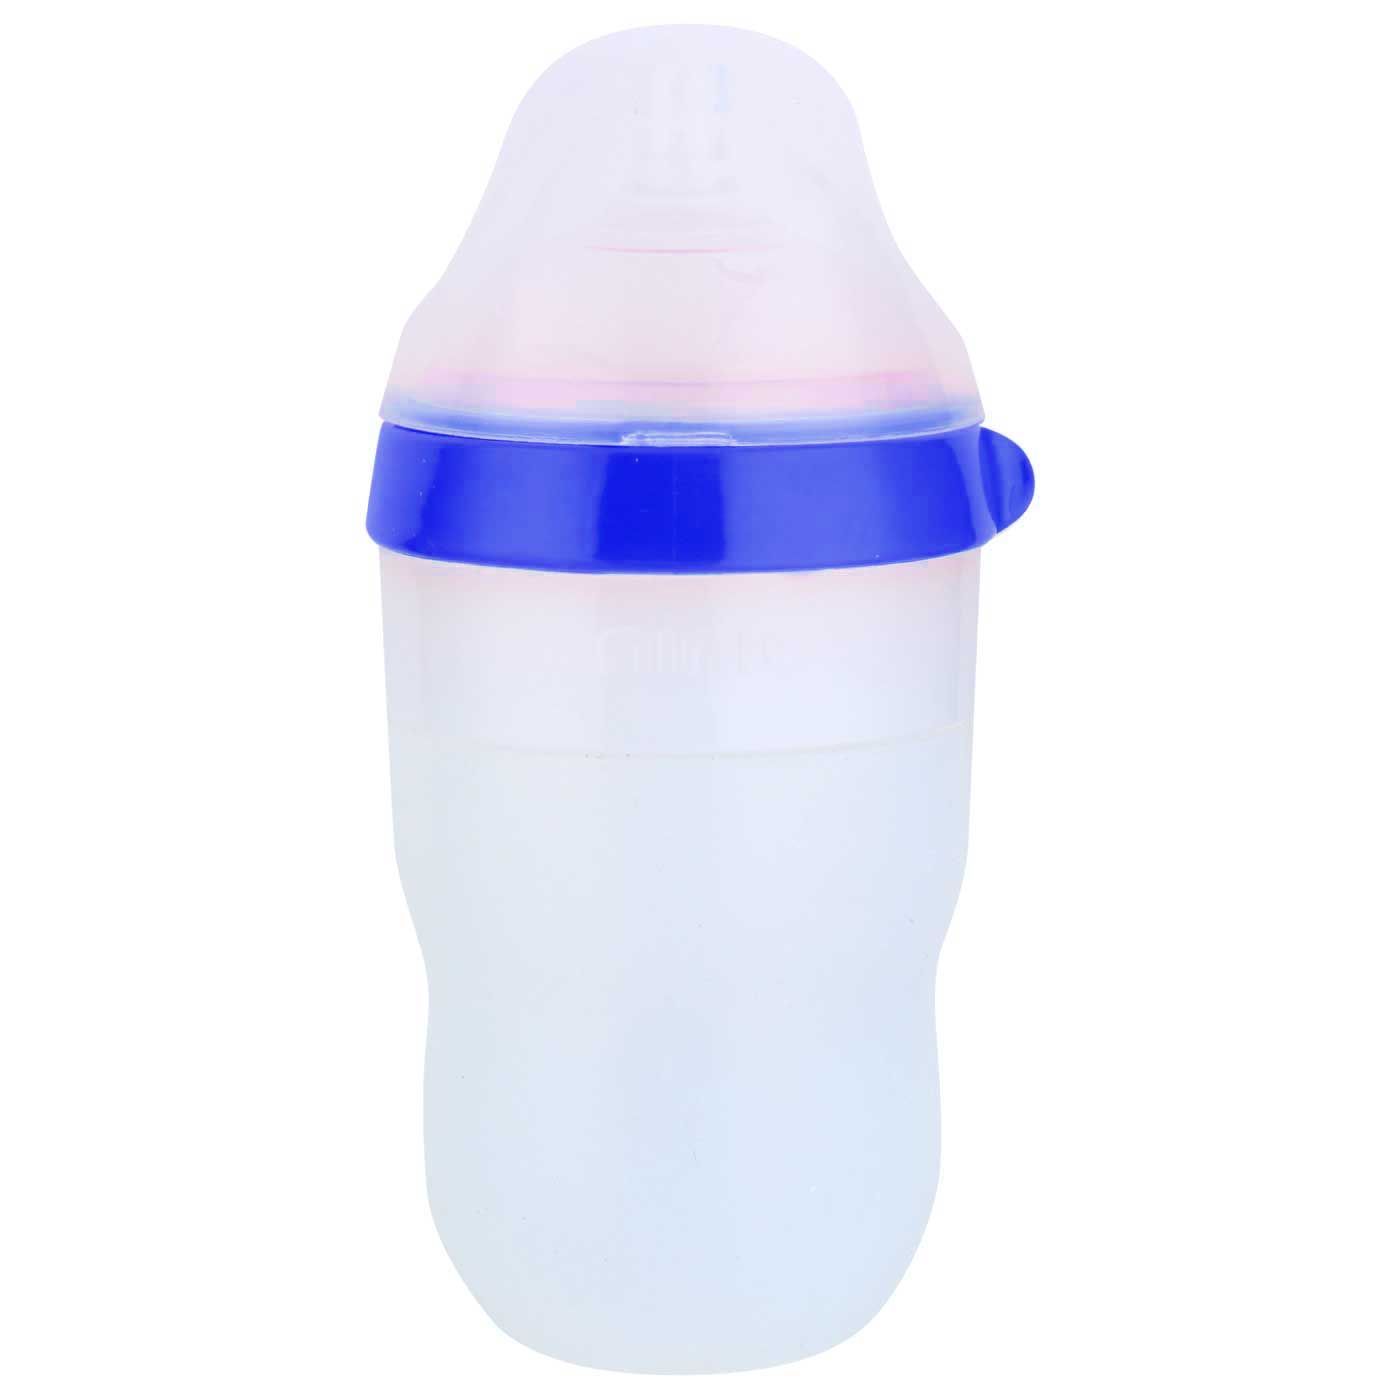 Ninio Silicone Bottle with Filter 7oz Blue - 1